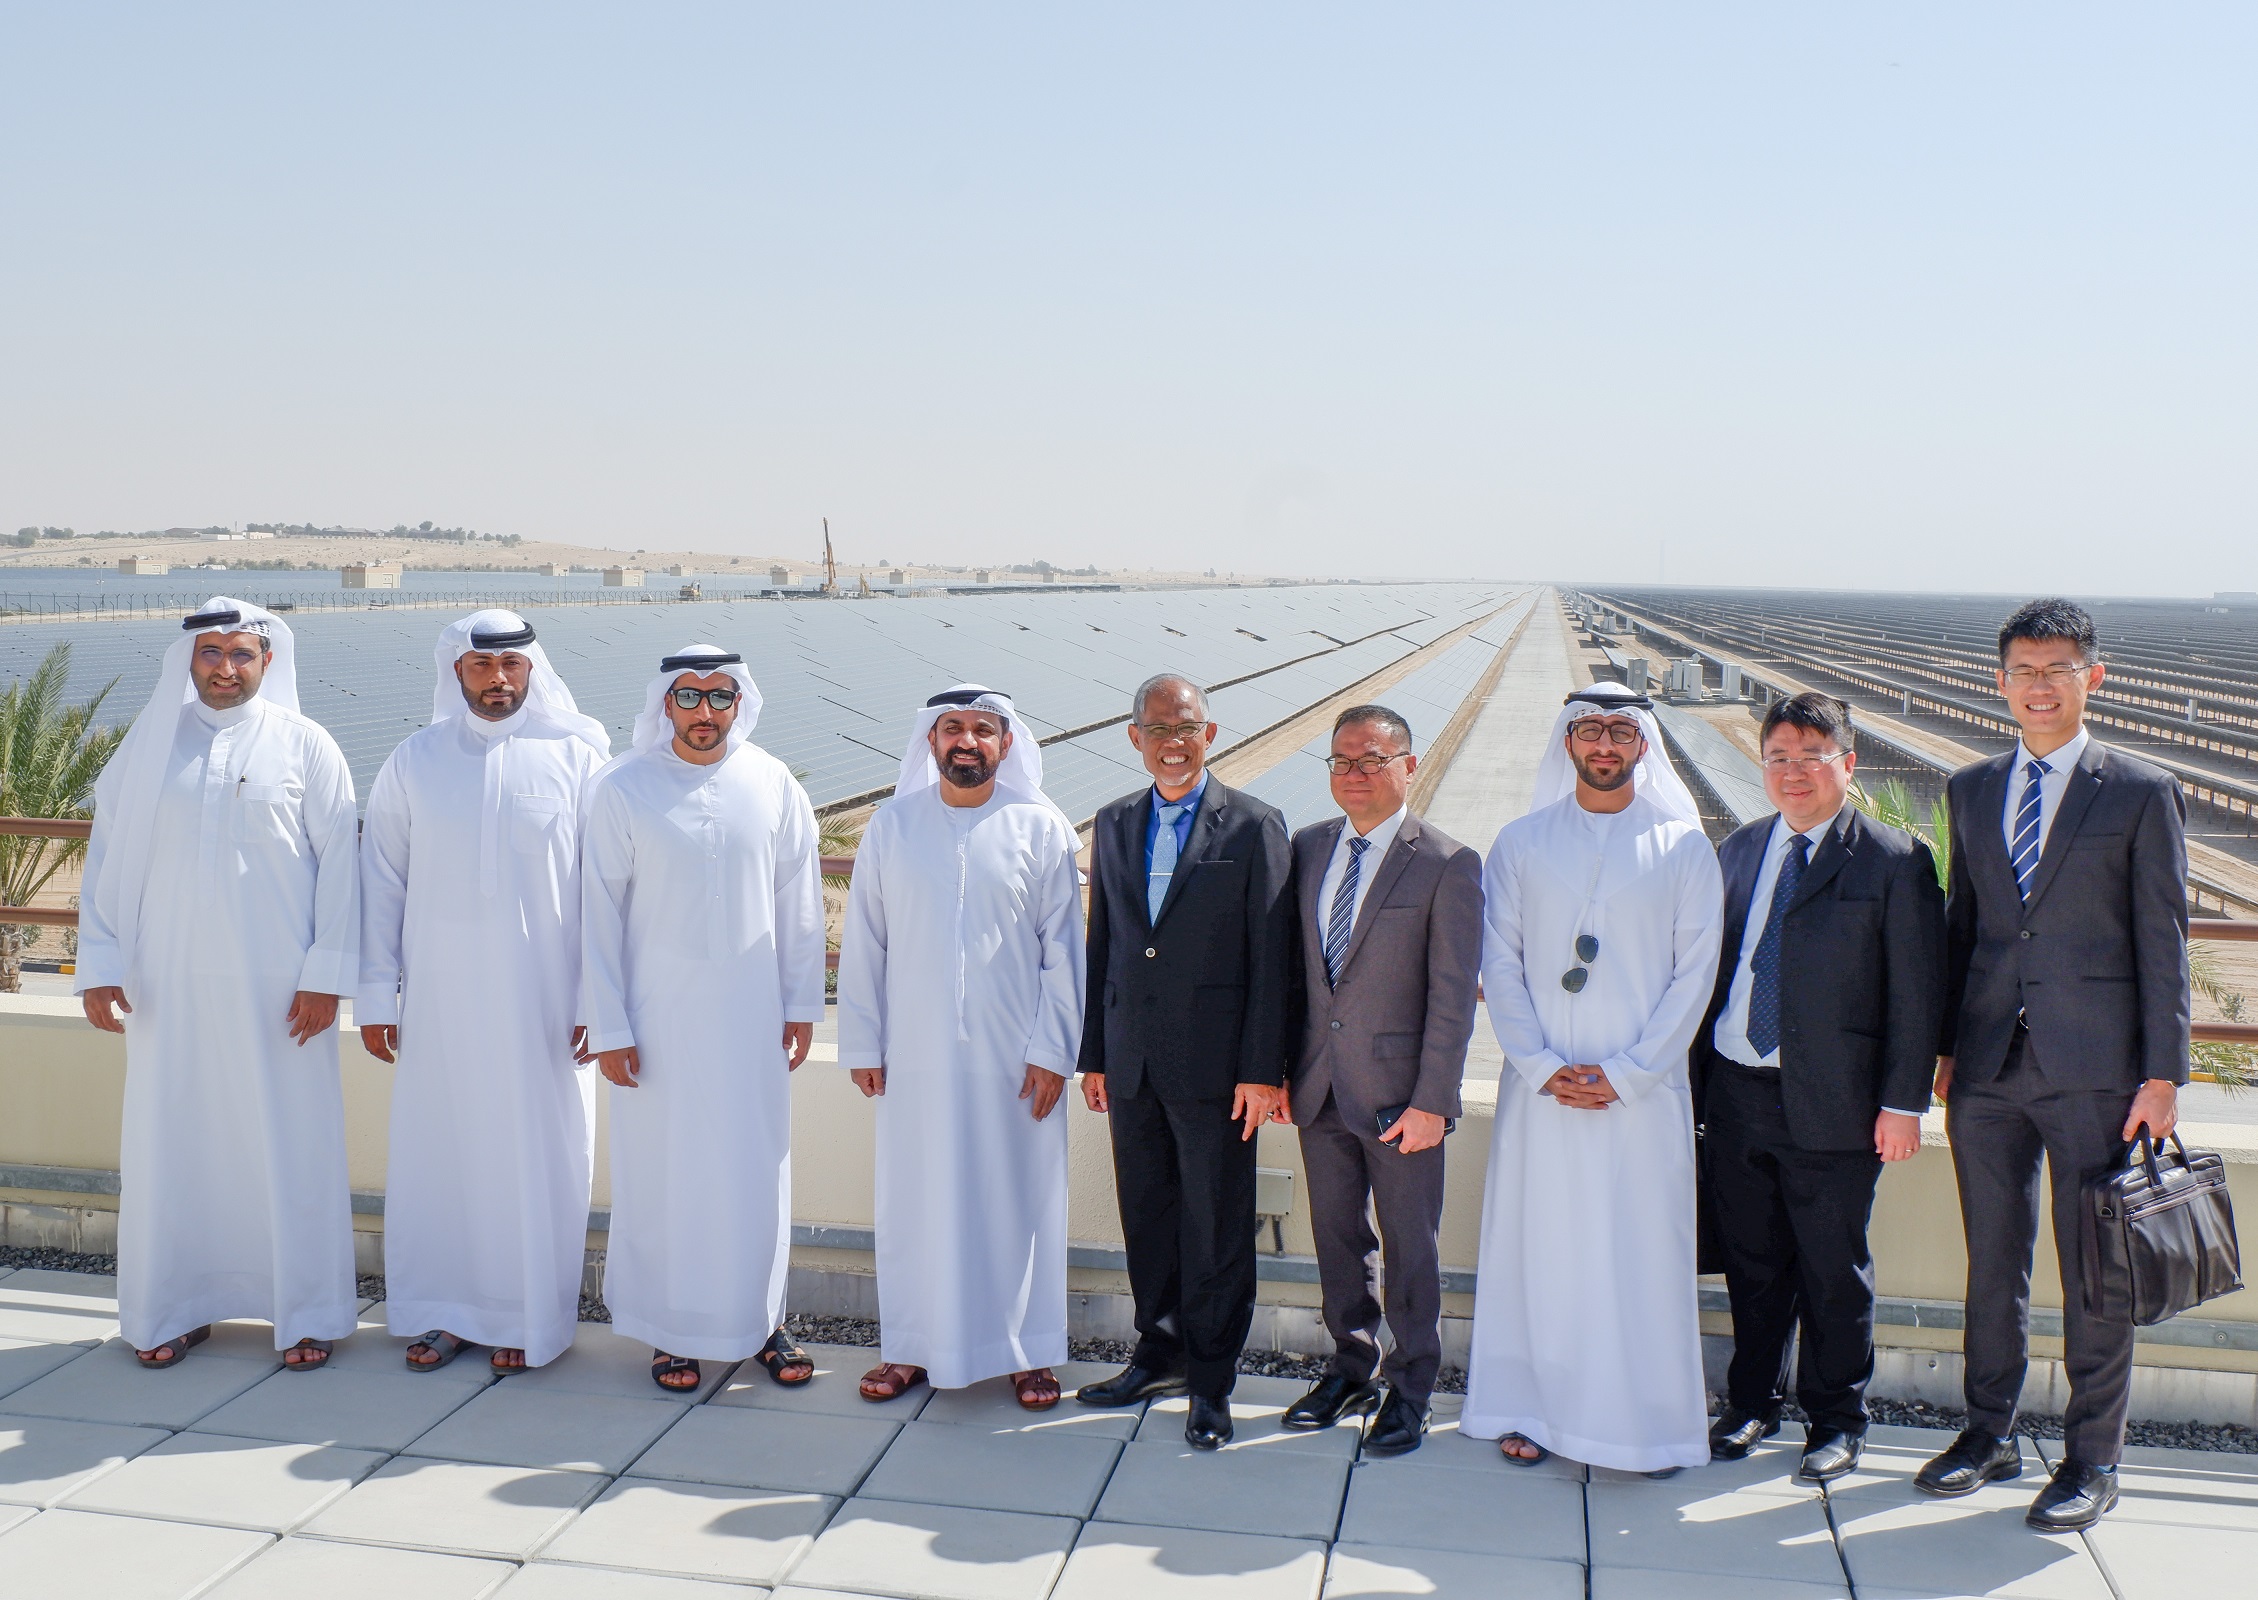 Singapore's Minister of Environment and Water Resources tours DEWA's projects in clean and renewable energy - Utilities Middle East